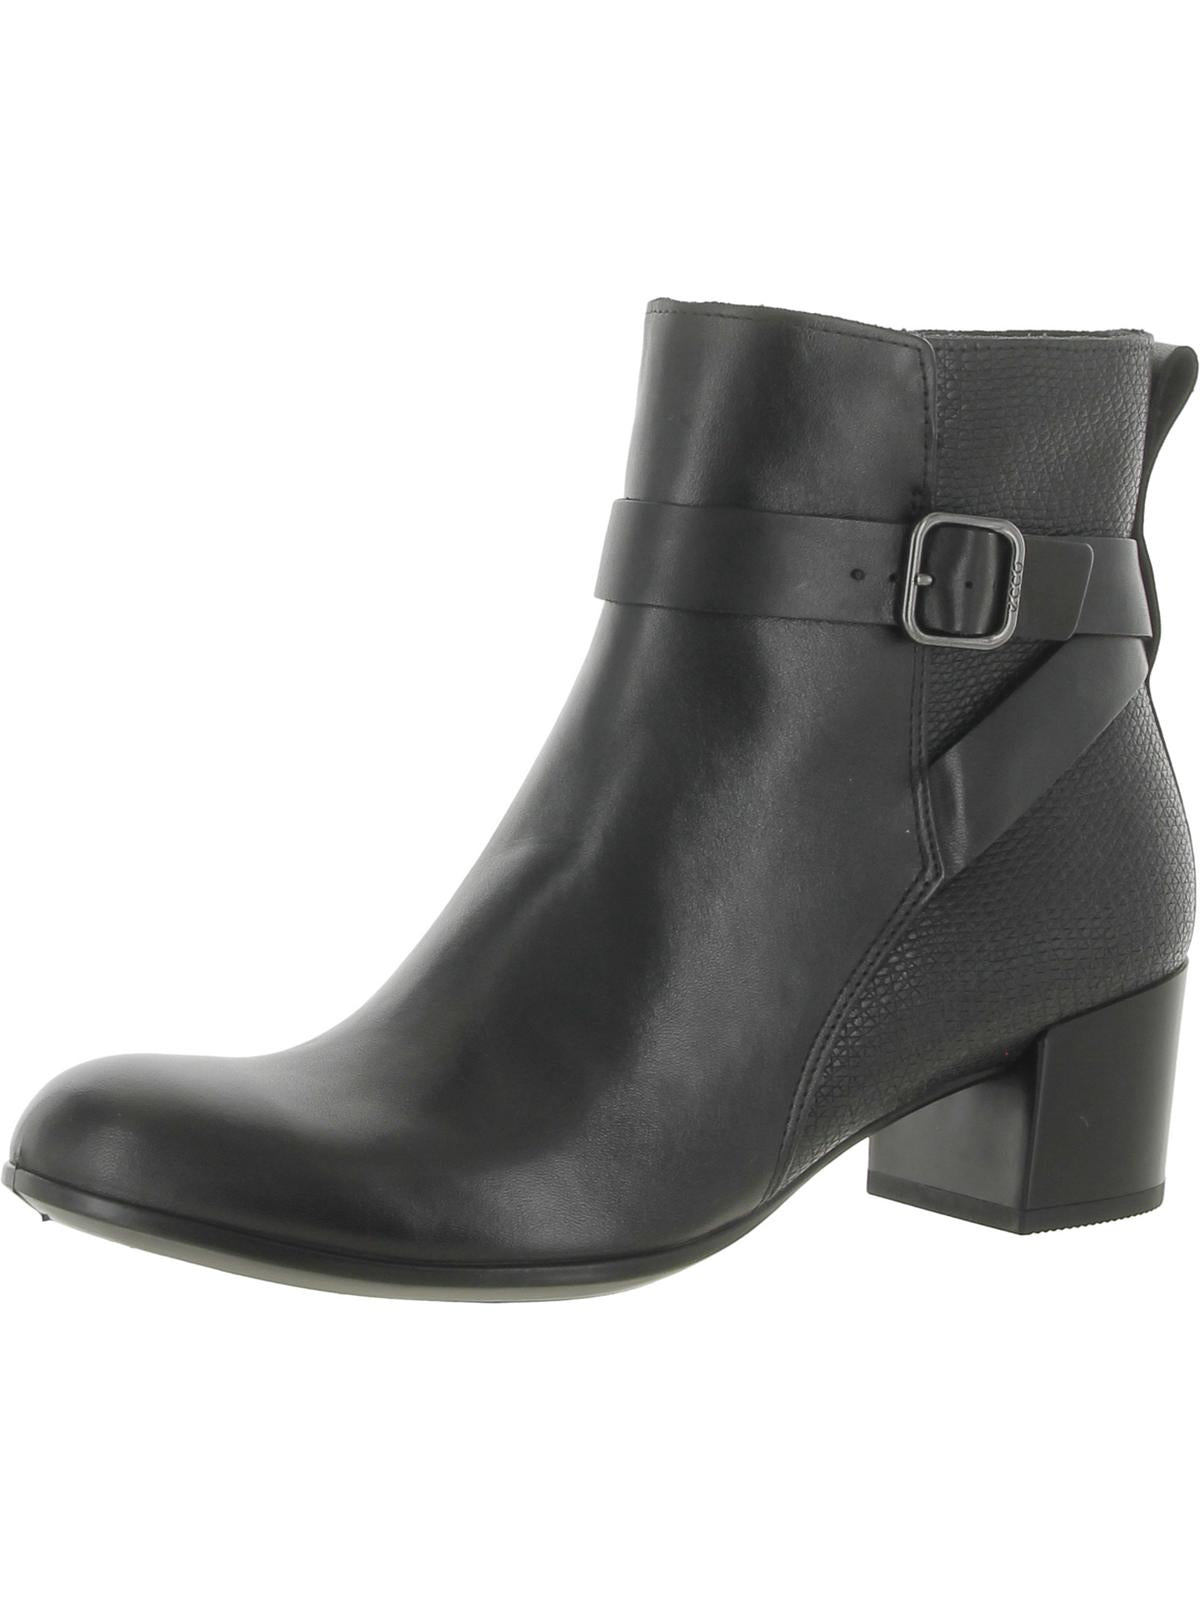 ECCO Womens Leather Textured Ankle Boots EU 39 female